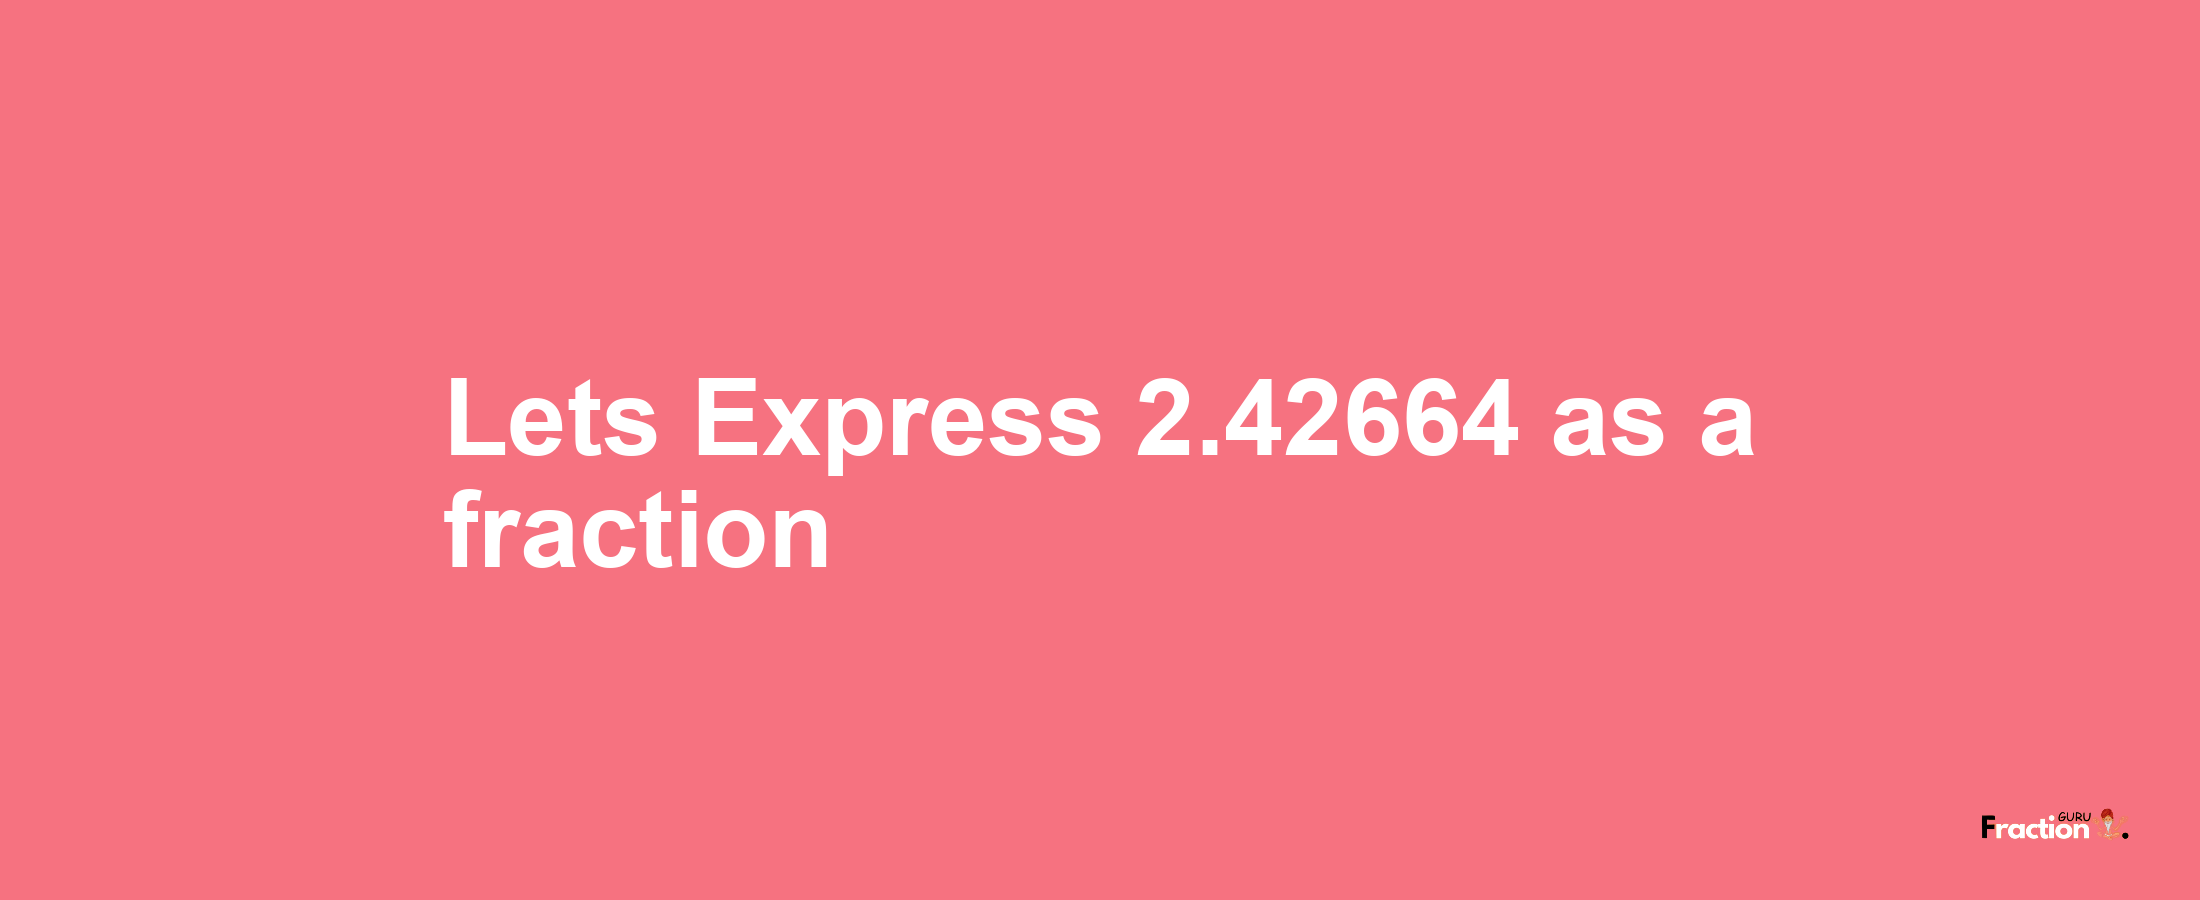 Lets Express 2.42664 as afraction